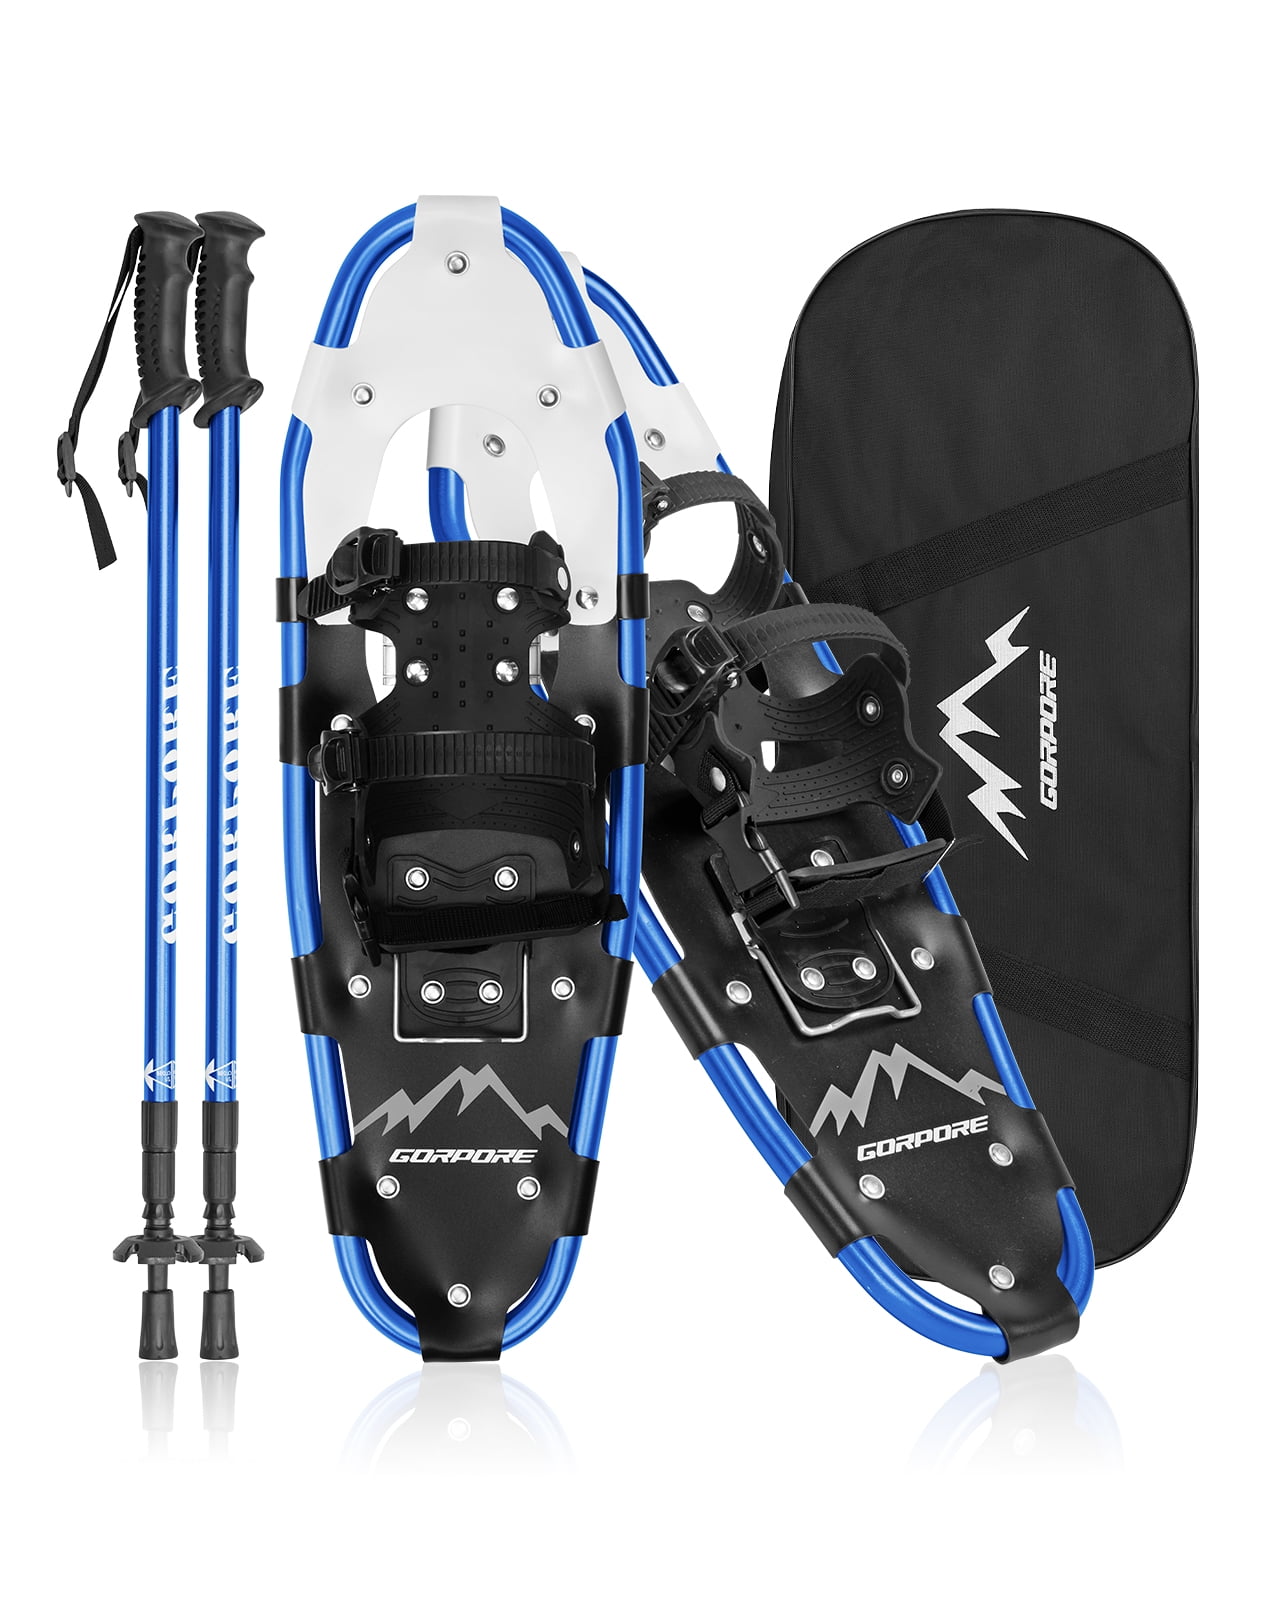 ALPS Xtreme Lightweight Adult Snowshoes Set with Pole and Carrying Tote for Men and Women 21/25/30 